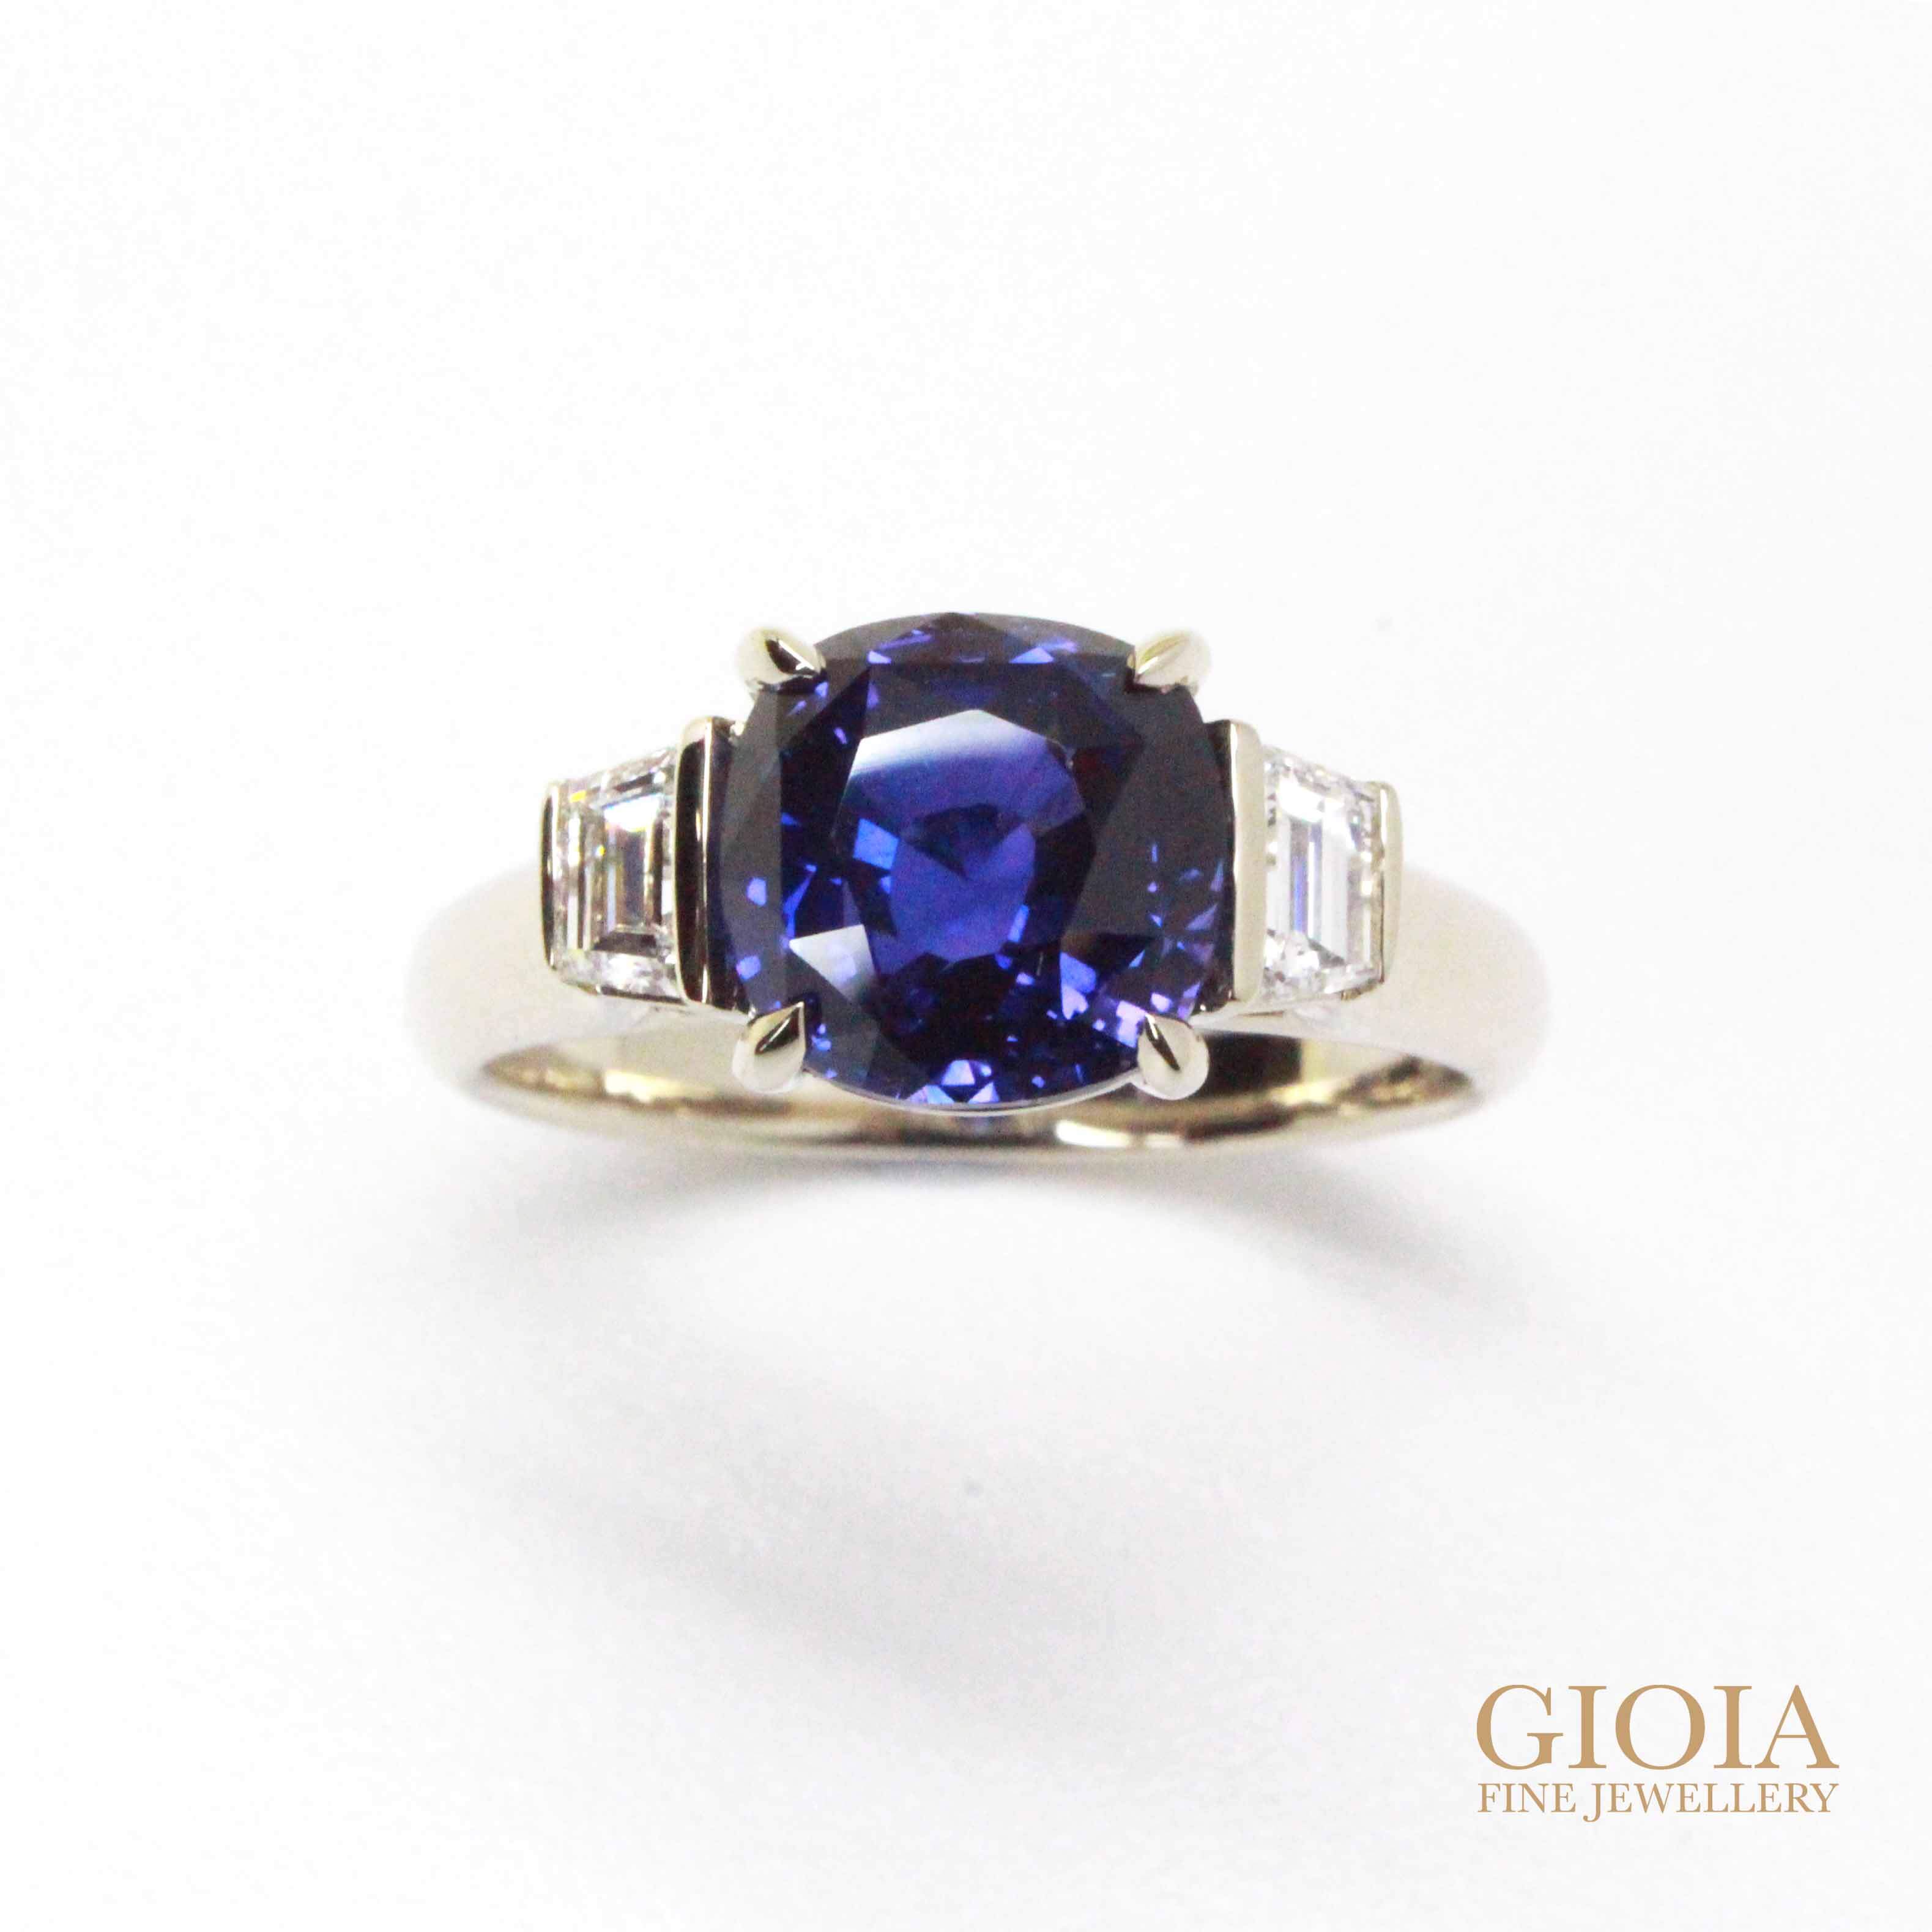 Colour Change Sapphire Ring - Deep blue sapphire with colour change to purple. Unique coloured gemstone | Local Singapore Custom made Jeweller